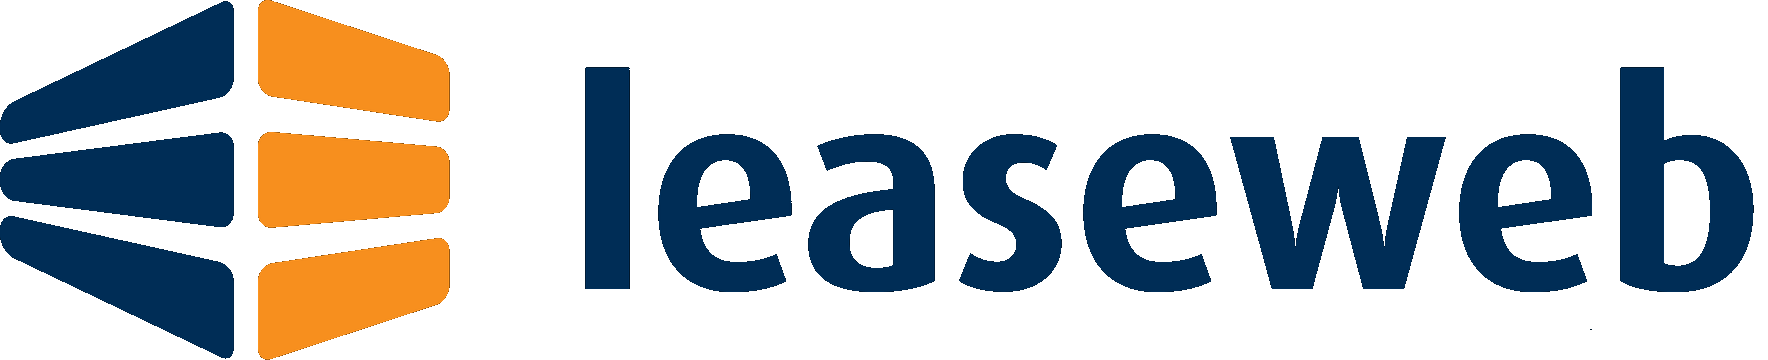 File:Leaseweb-logo.png